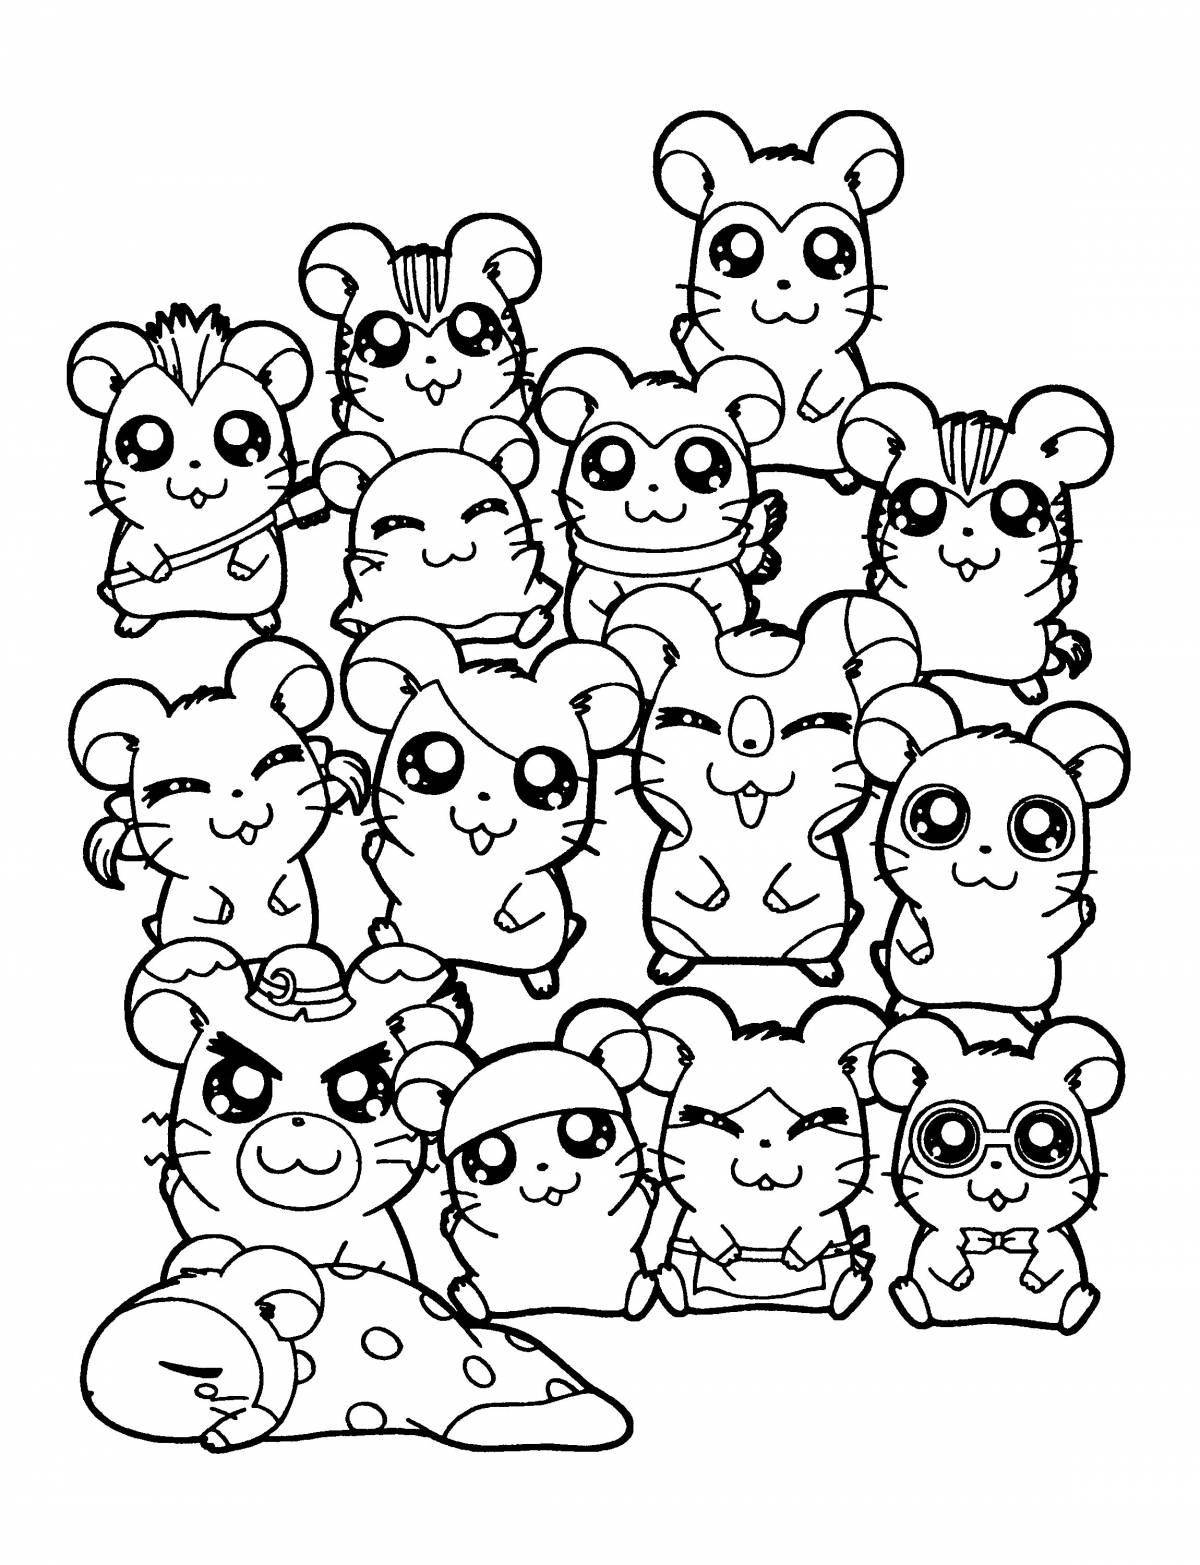 Adorable and fluffy pet coloring pages